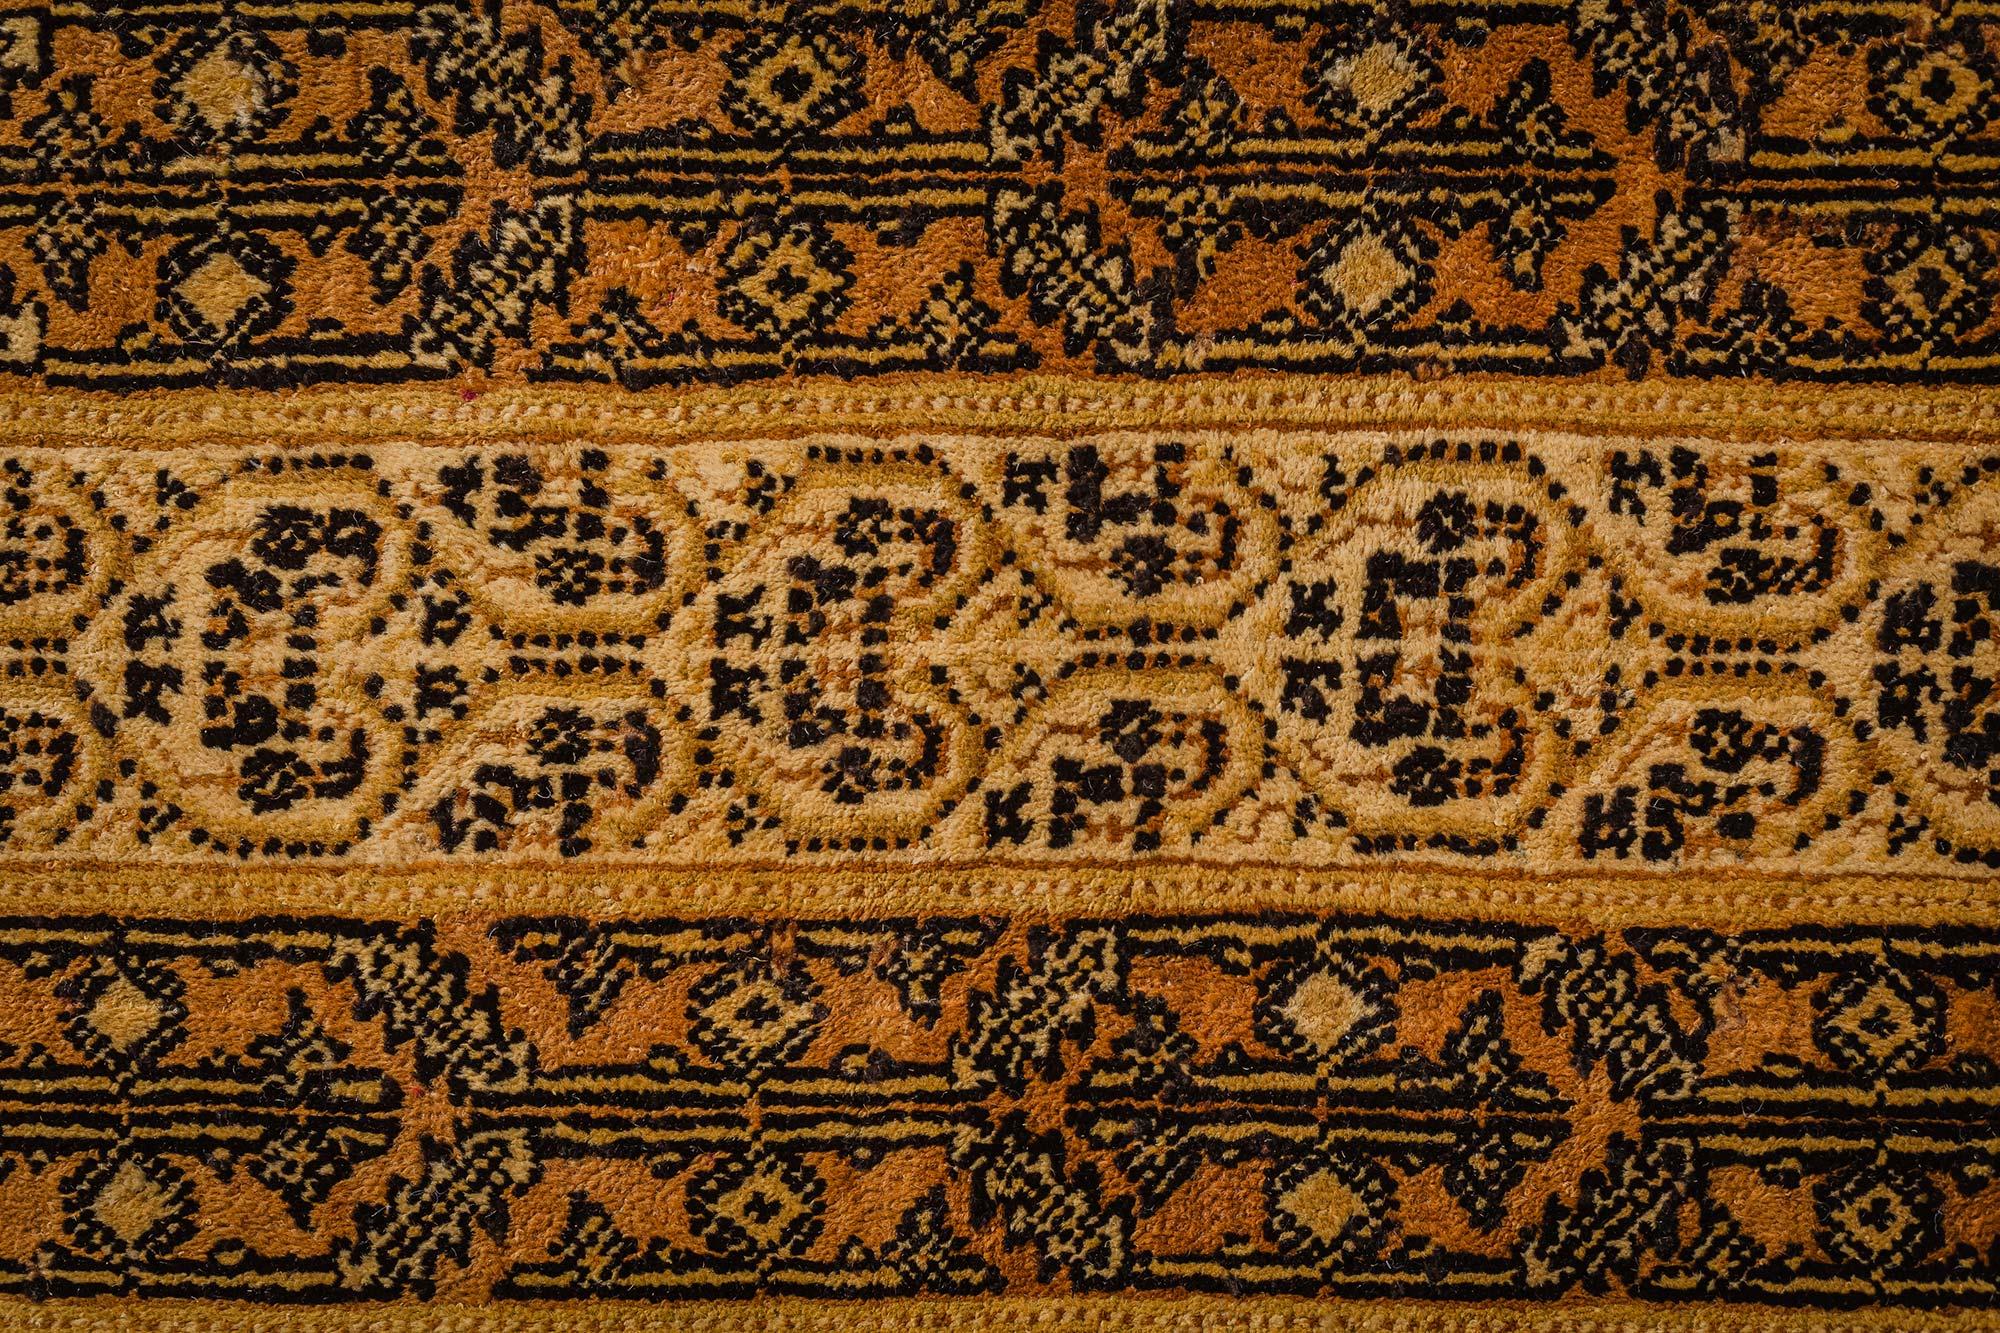 Antiquities Indian Agra Brown Hand Knotsted Wool Rug (tapis de laine noué à la main)
Taille : 12'0